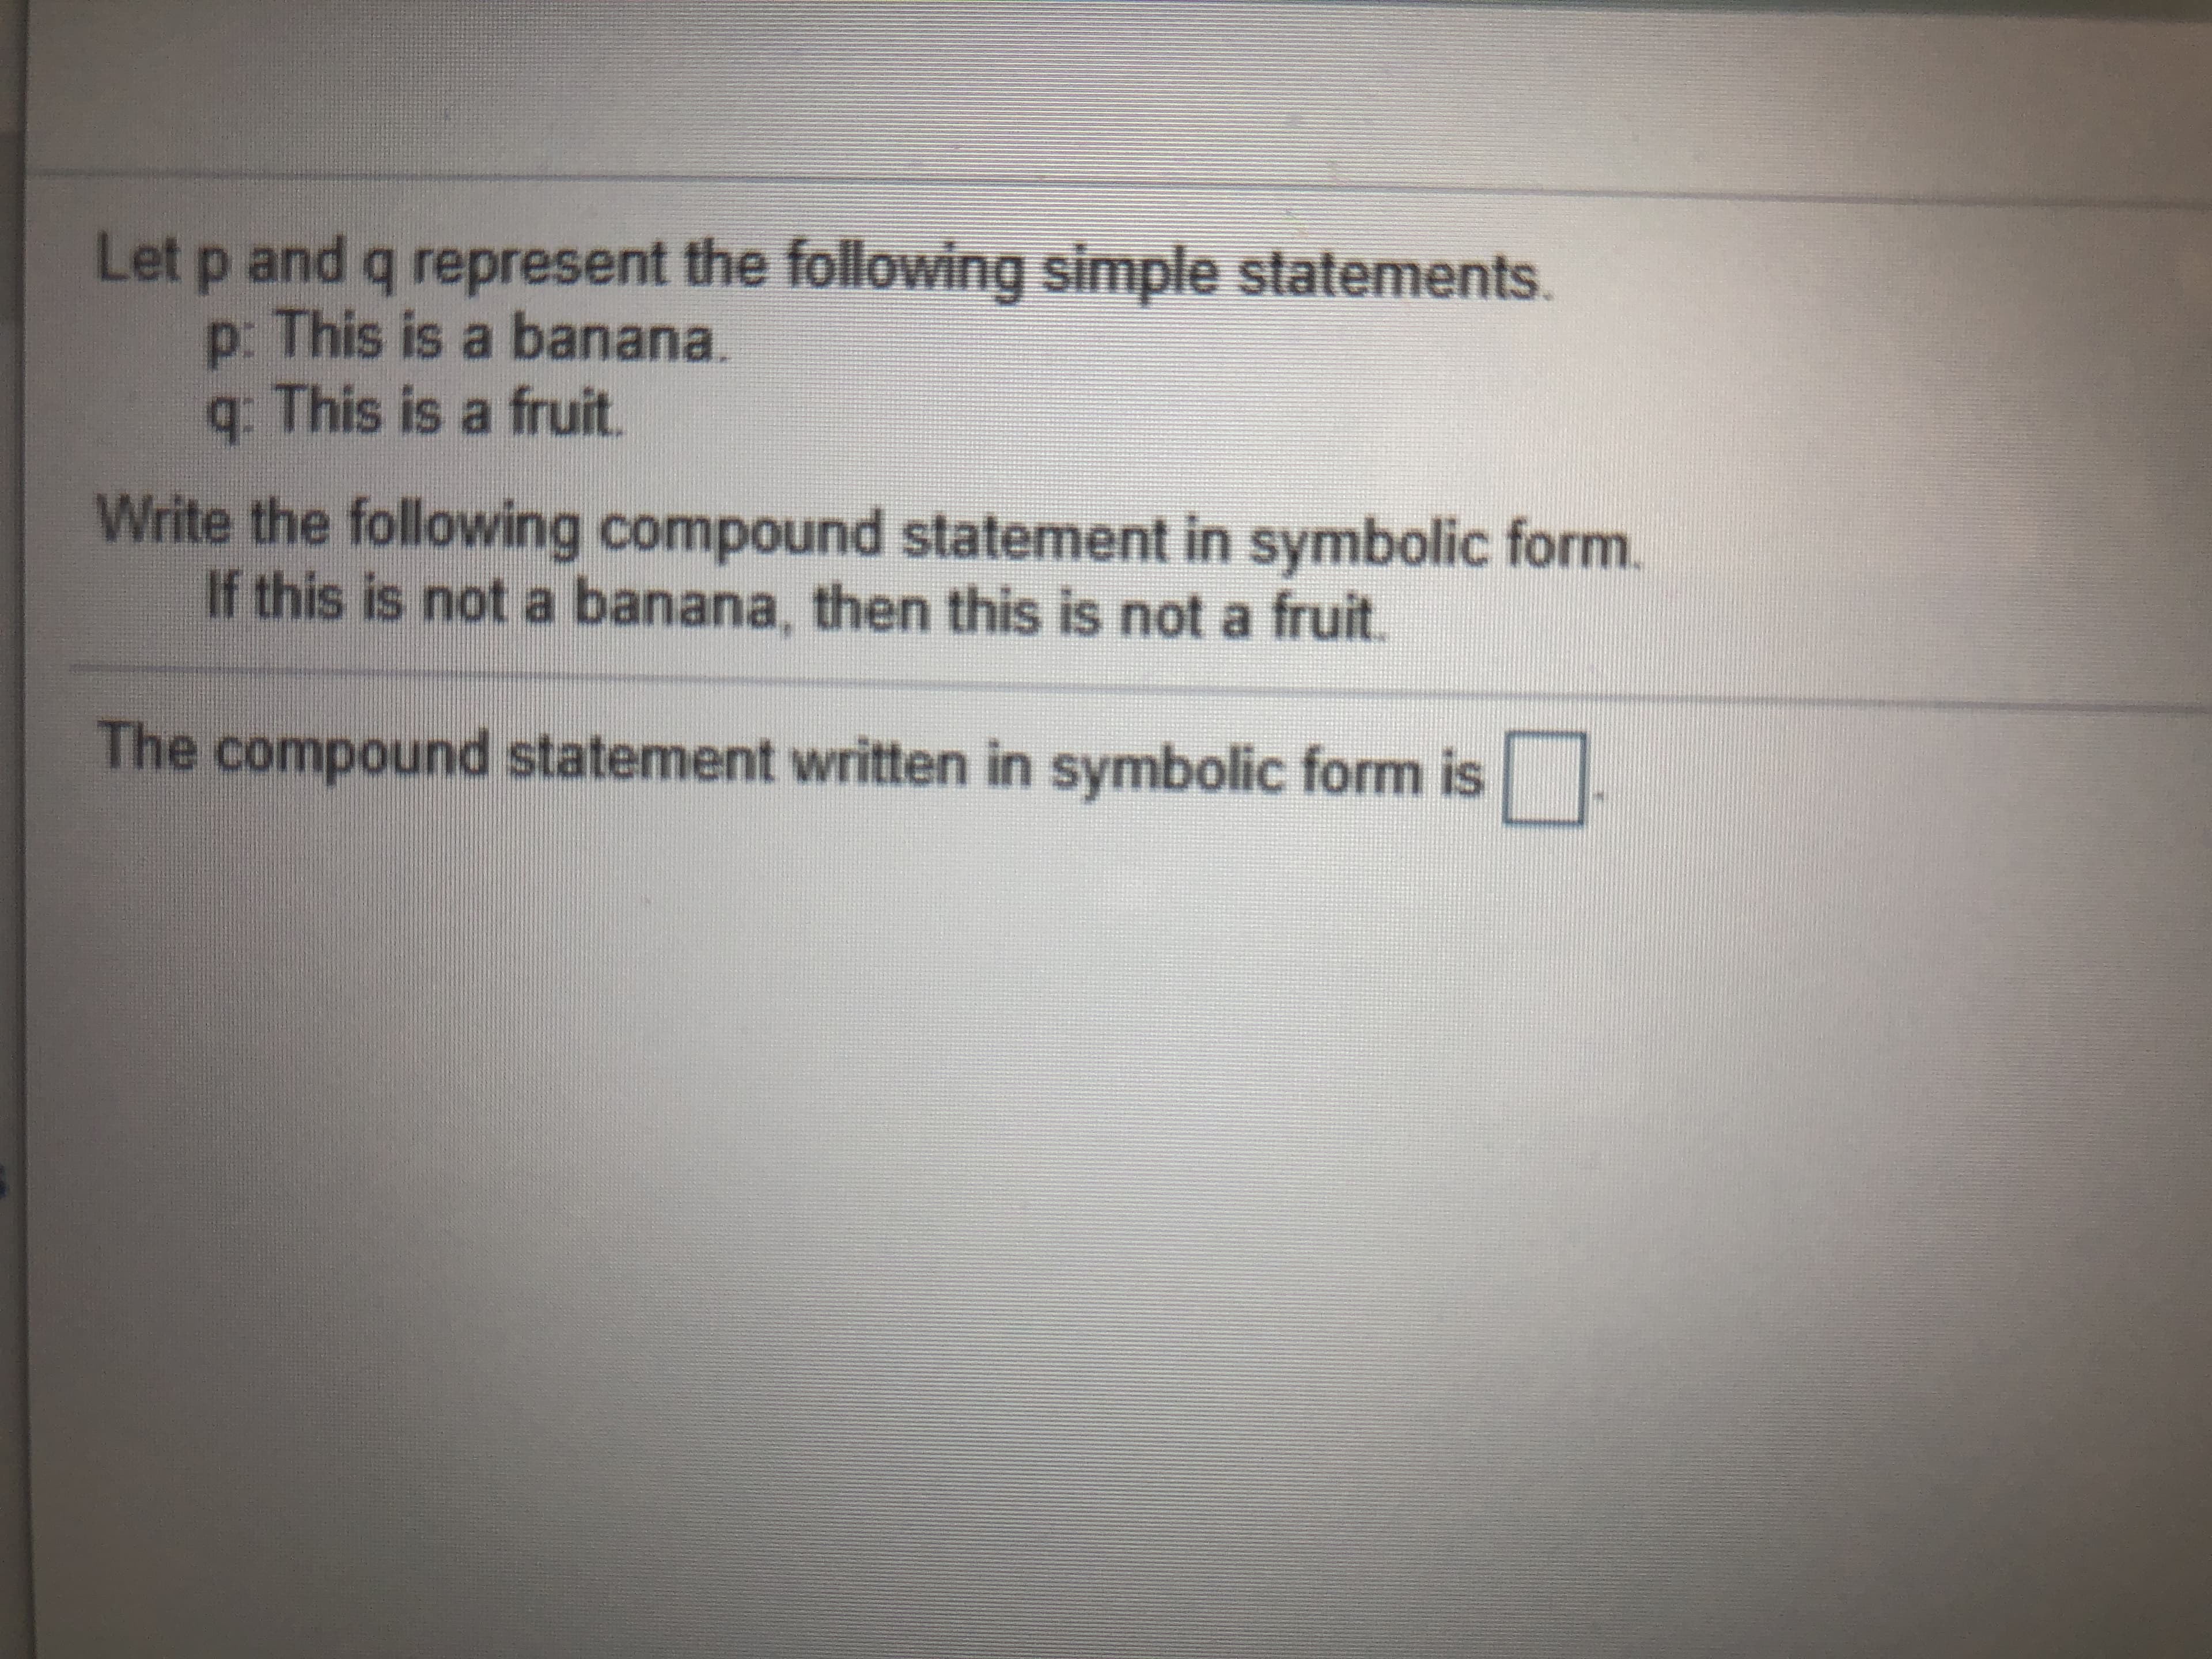 Let p and q represent the following simple statements.
p: This is a banana.
q. This is a fruit.
Write the following compound statement in symbolic form.
If this is not a banana, then this is not a fruit.
